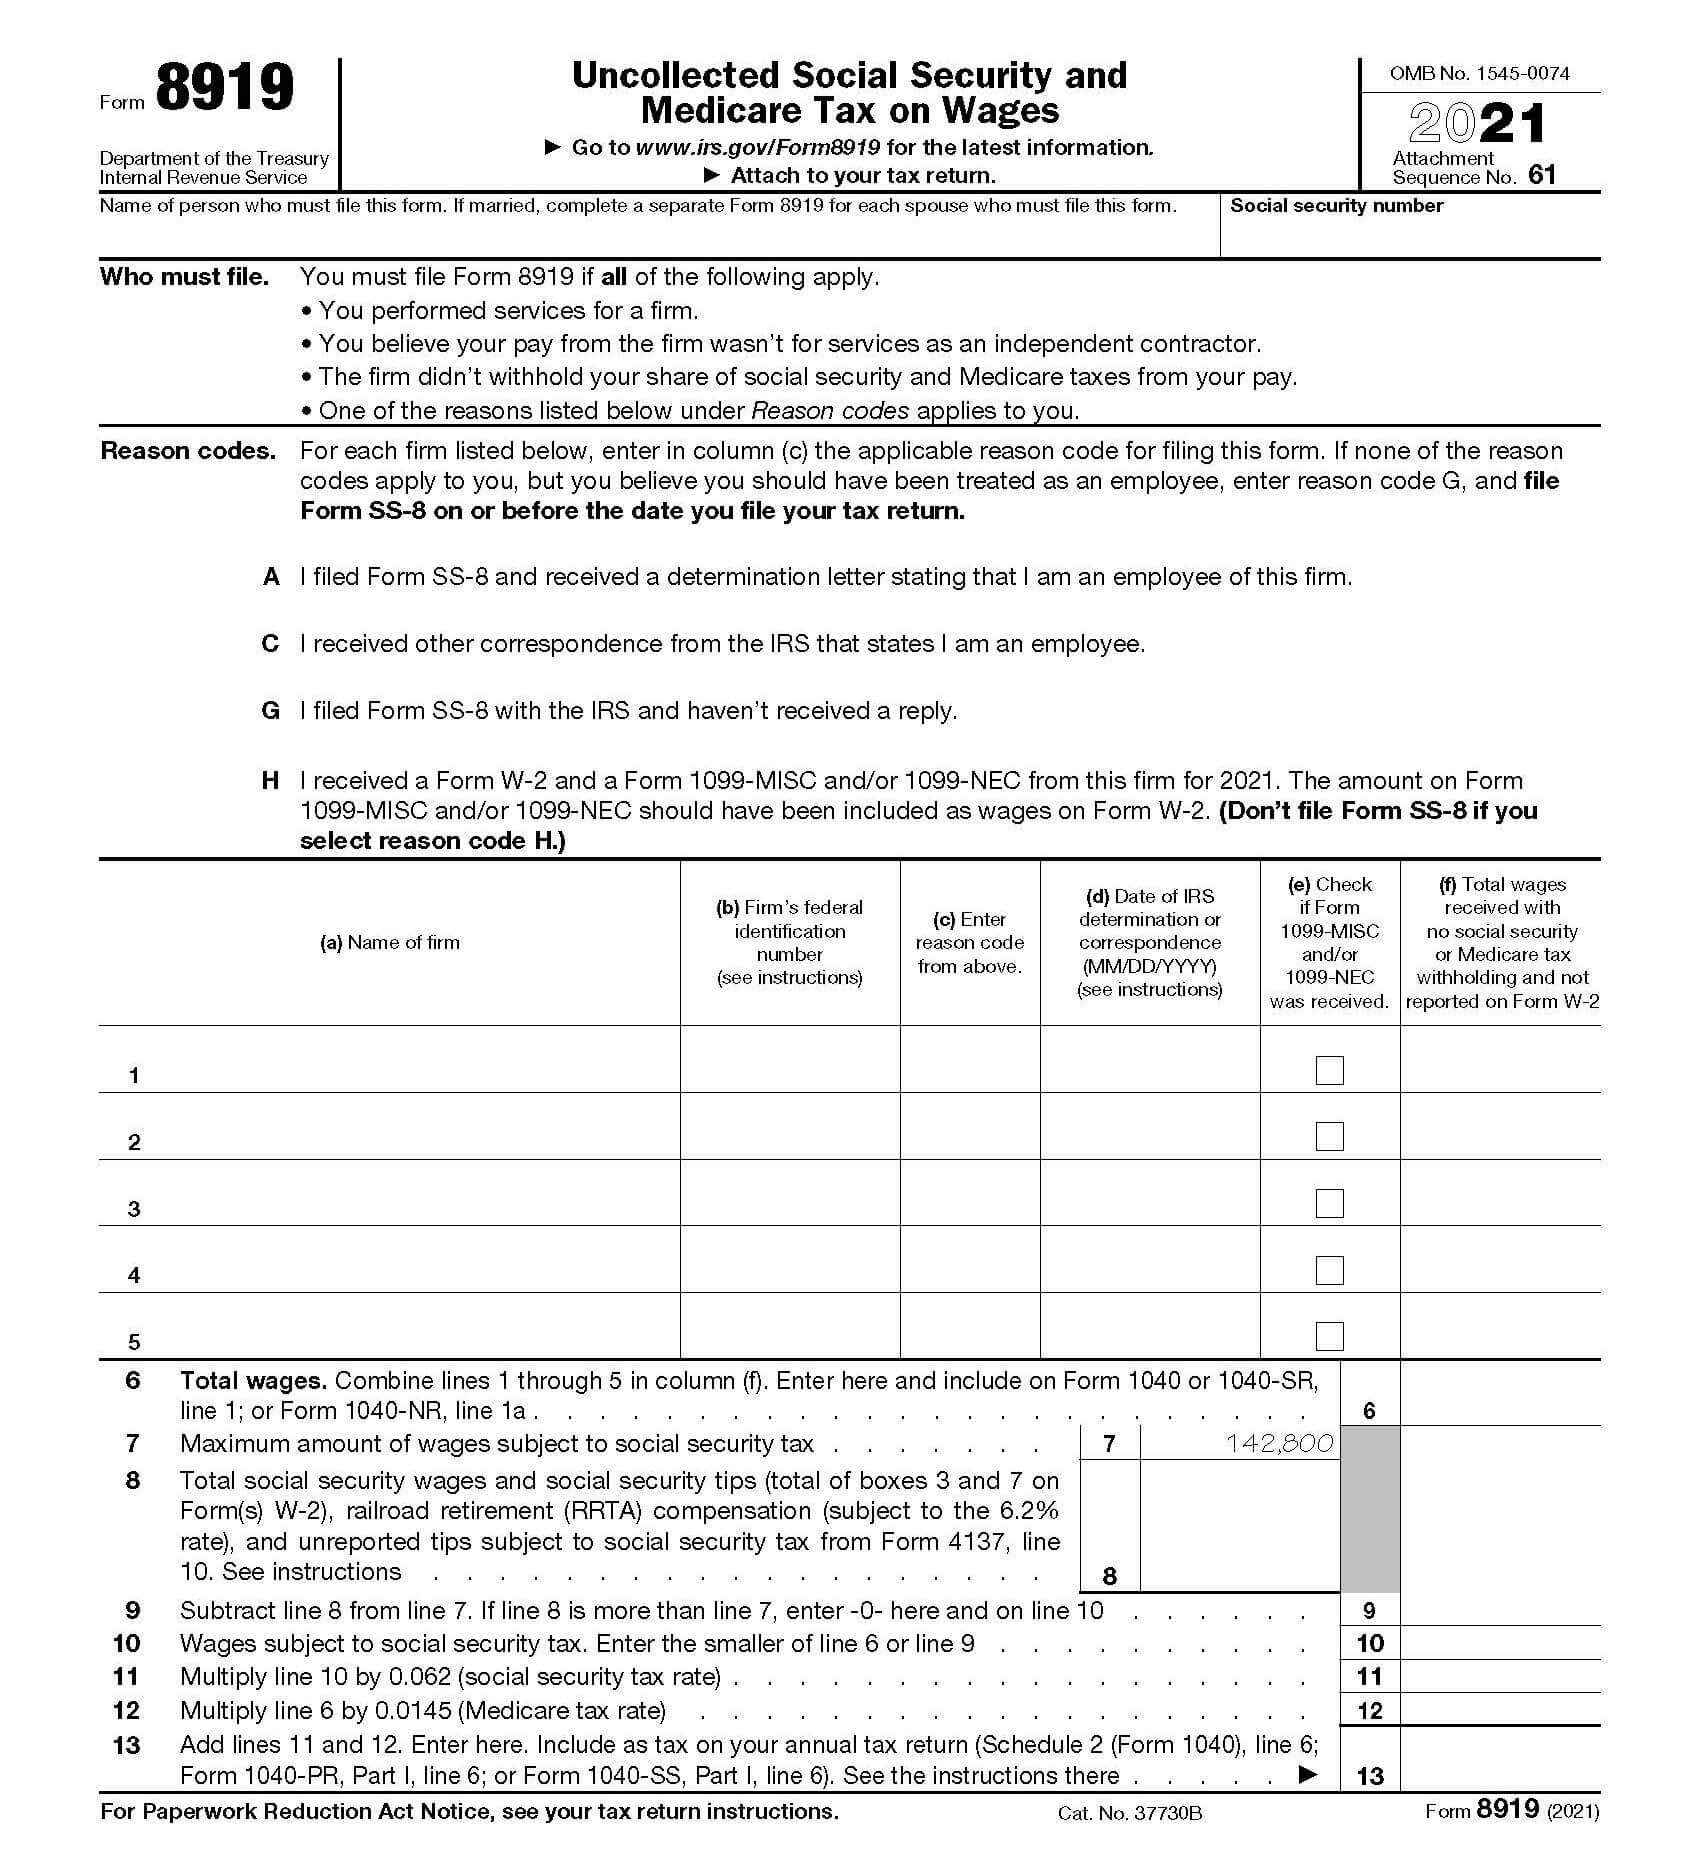 irs form-8919 example